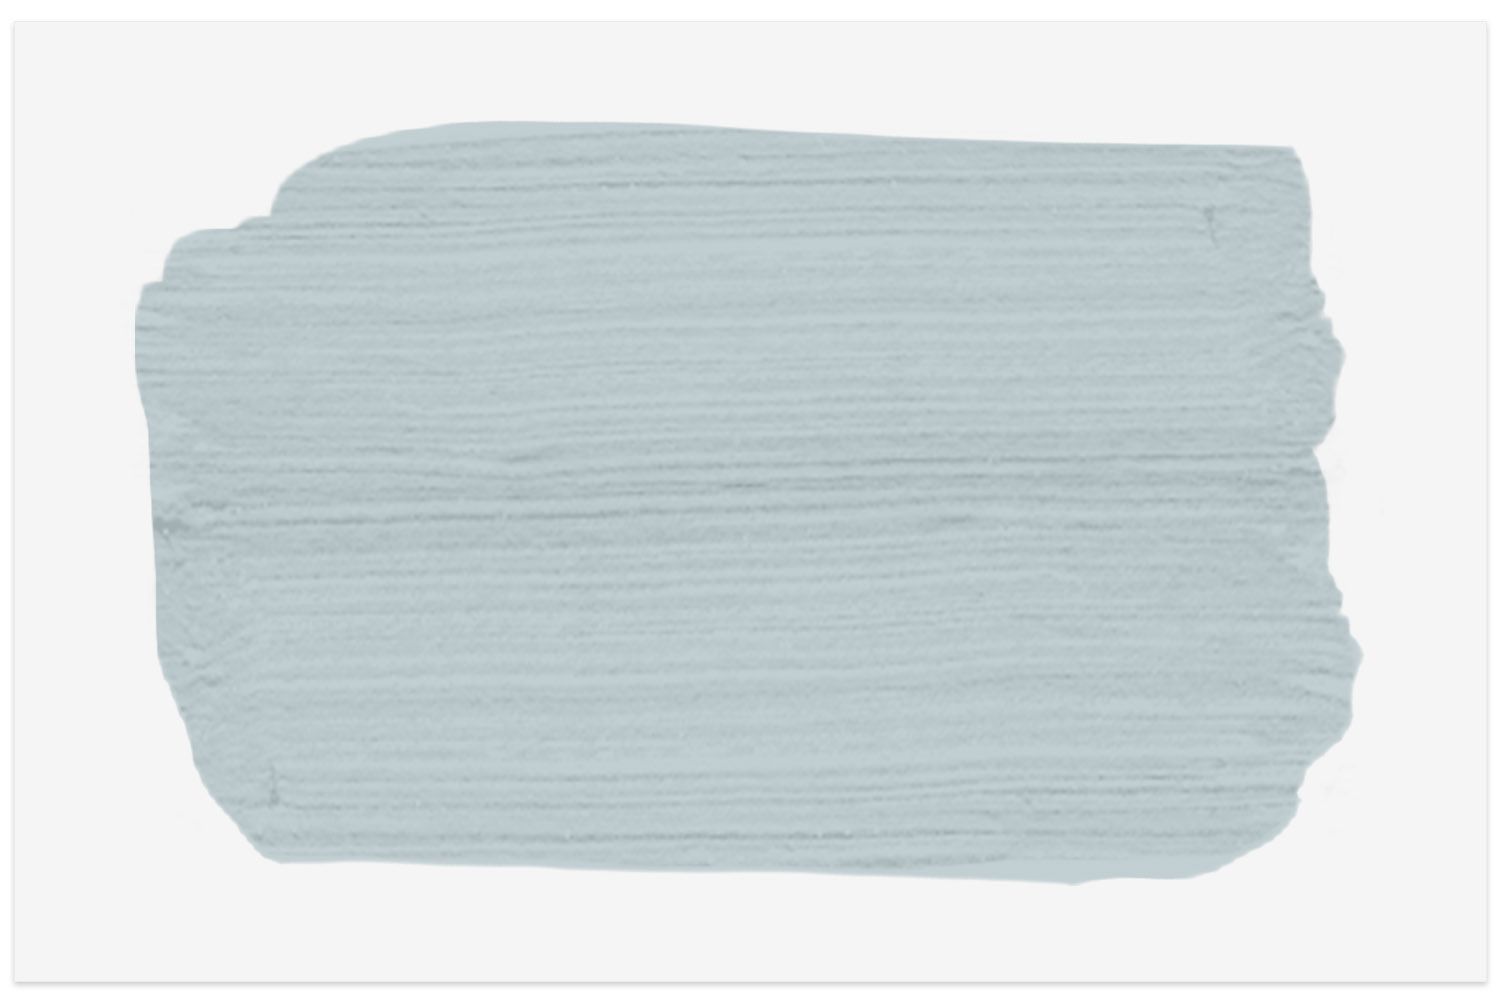 Tradewind paint swatch from Sherwin-Williams